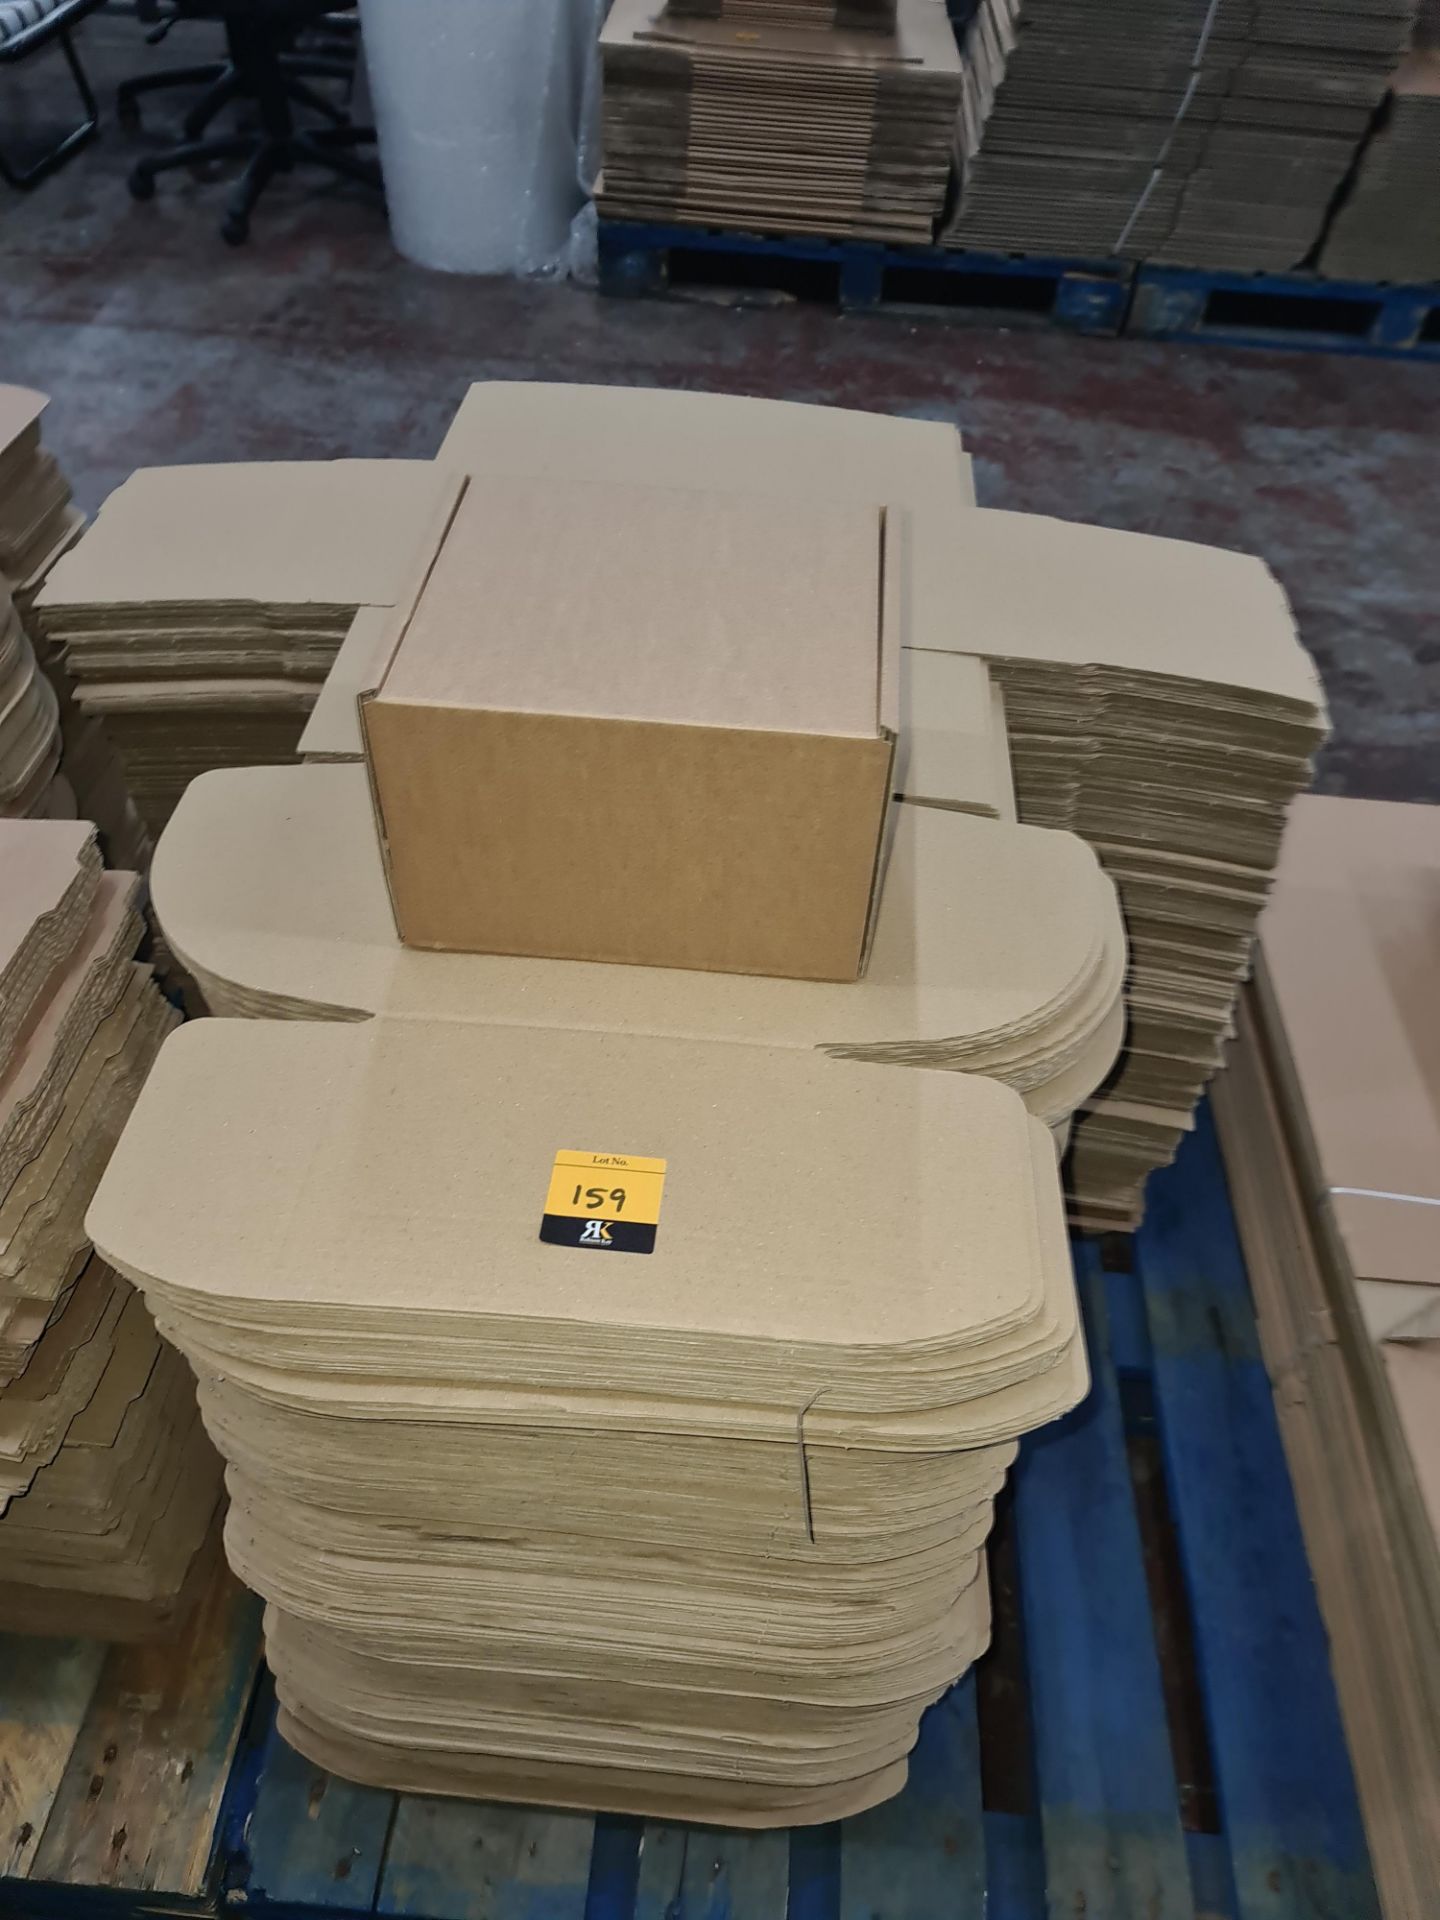 Approximately 211 off cardboard boxes each measuring approximately 235mm x 200mm x 155mm when assem